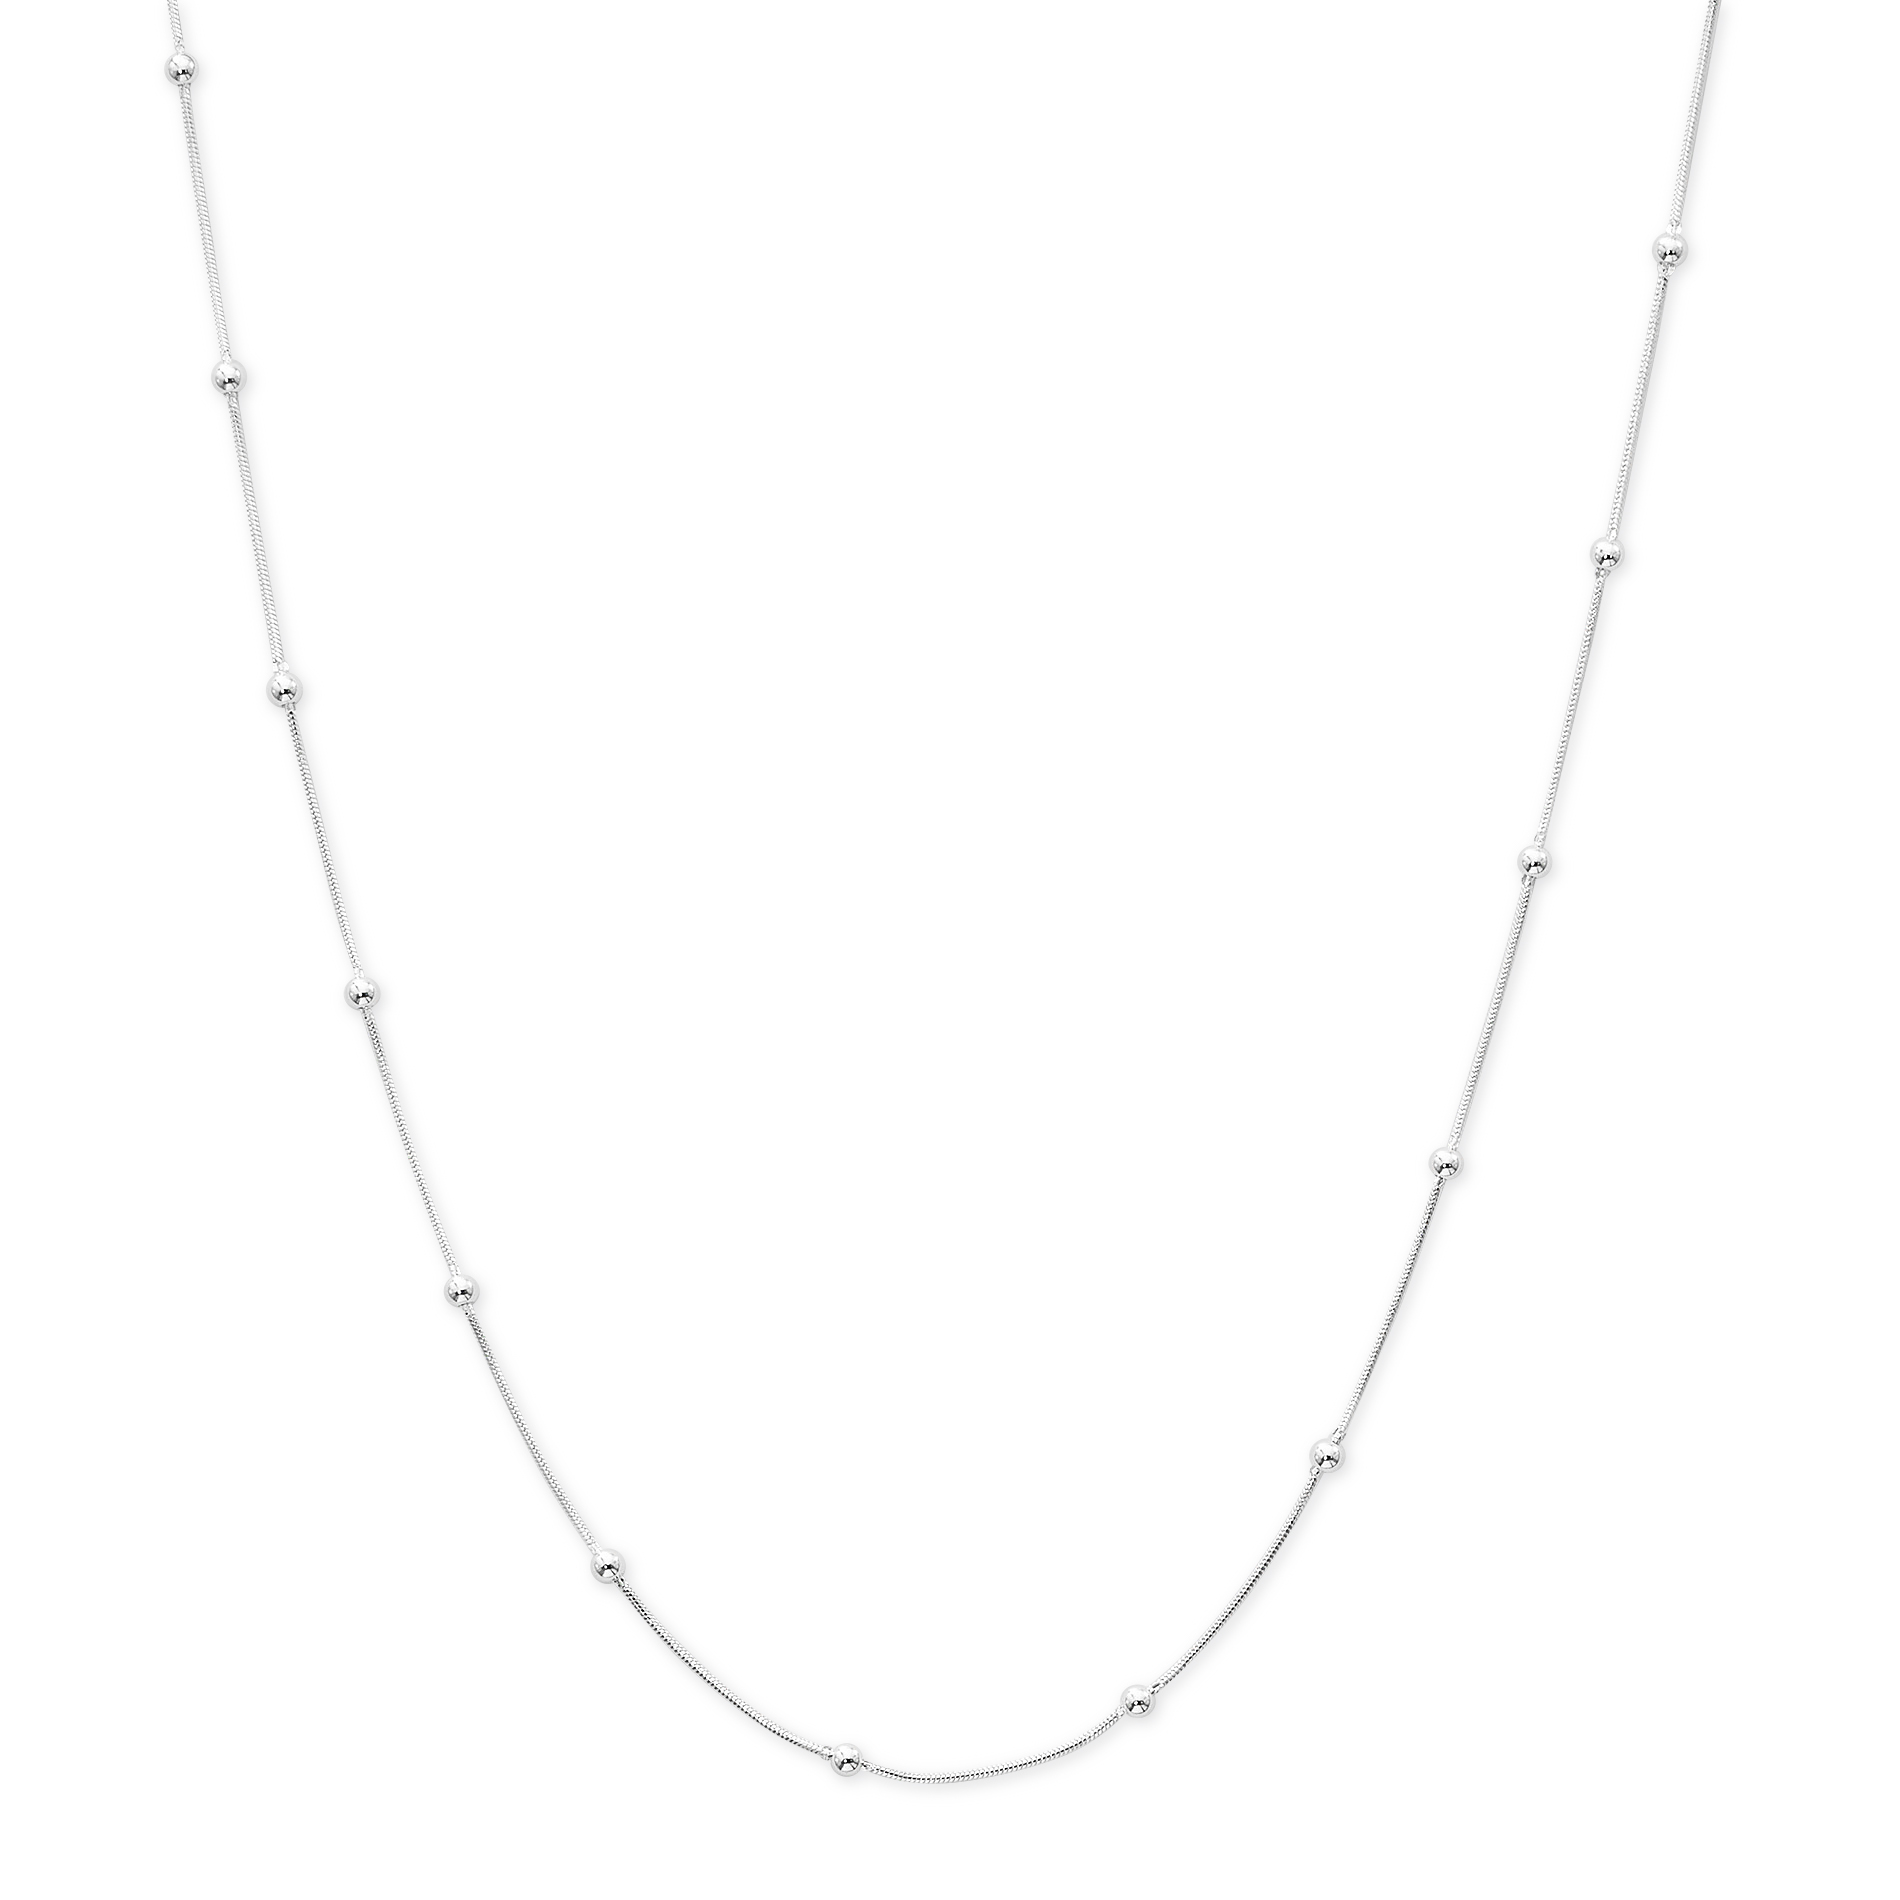 Primavera Pure 100 Silver Snake with Polished Beads 20 inch Chain.